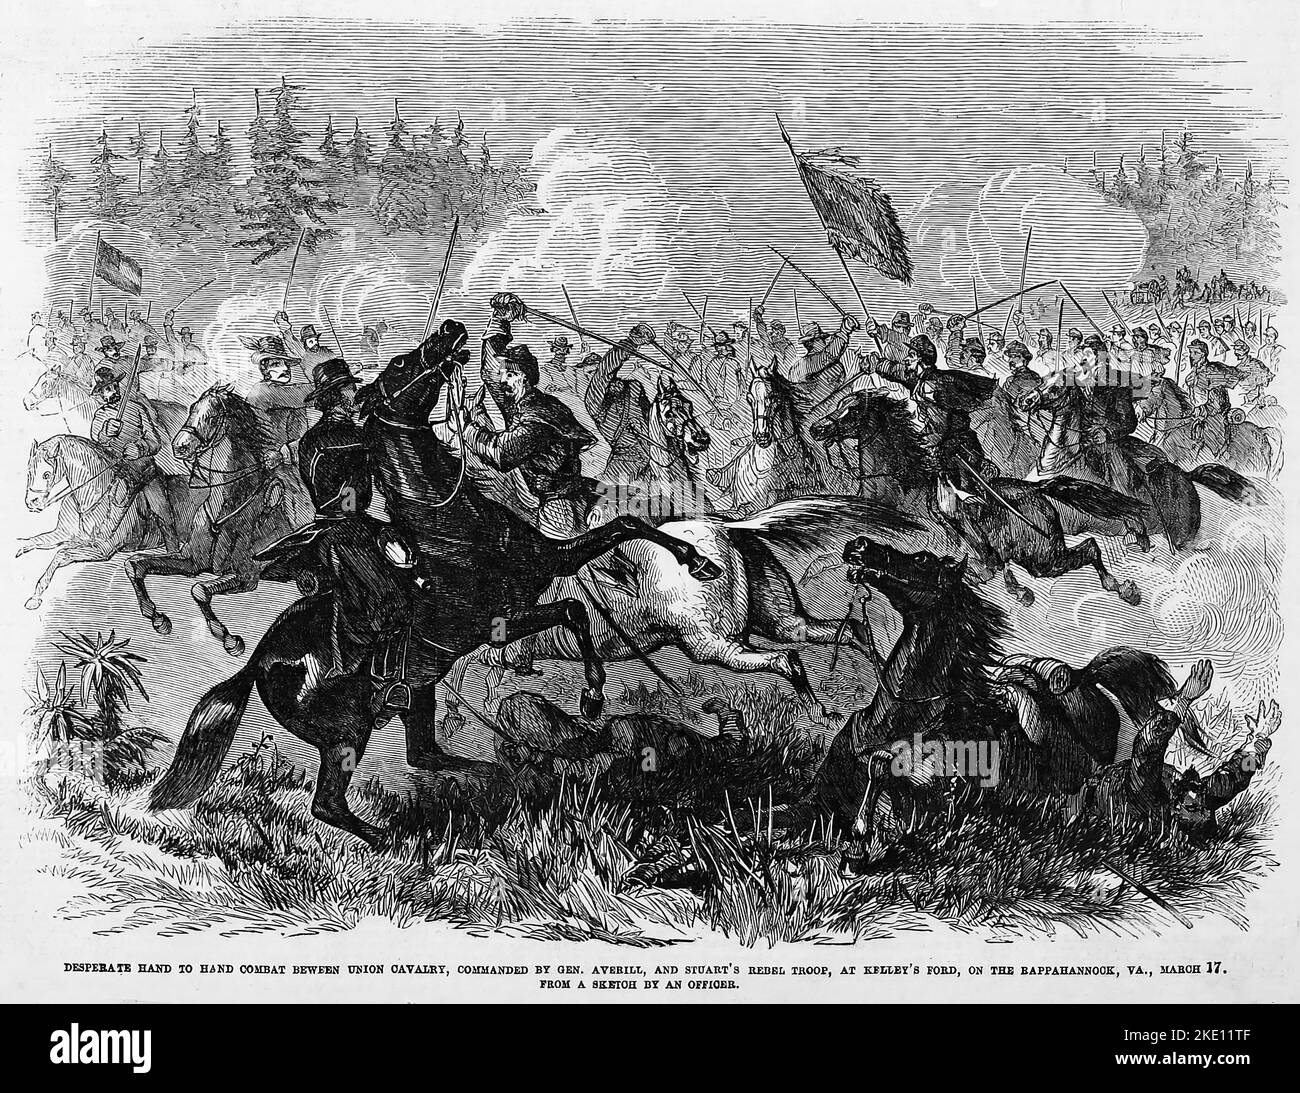 Desperate hand to hand combat between Union cavalry, commanded by General William Woods Averell, and J. E. B. Stuart's Rebel troop, at Kelley's Ford, on the Rappahannock, Virginia, March 17th, 1863. 19th century American Civil War illustration from Frank Leslie's Illustrated Newspaper Stock Photo